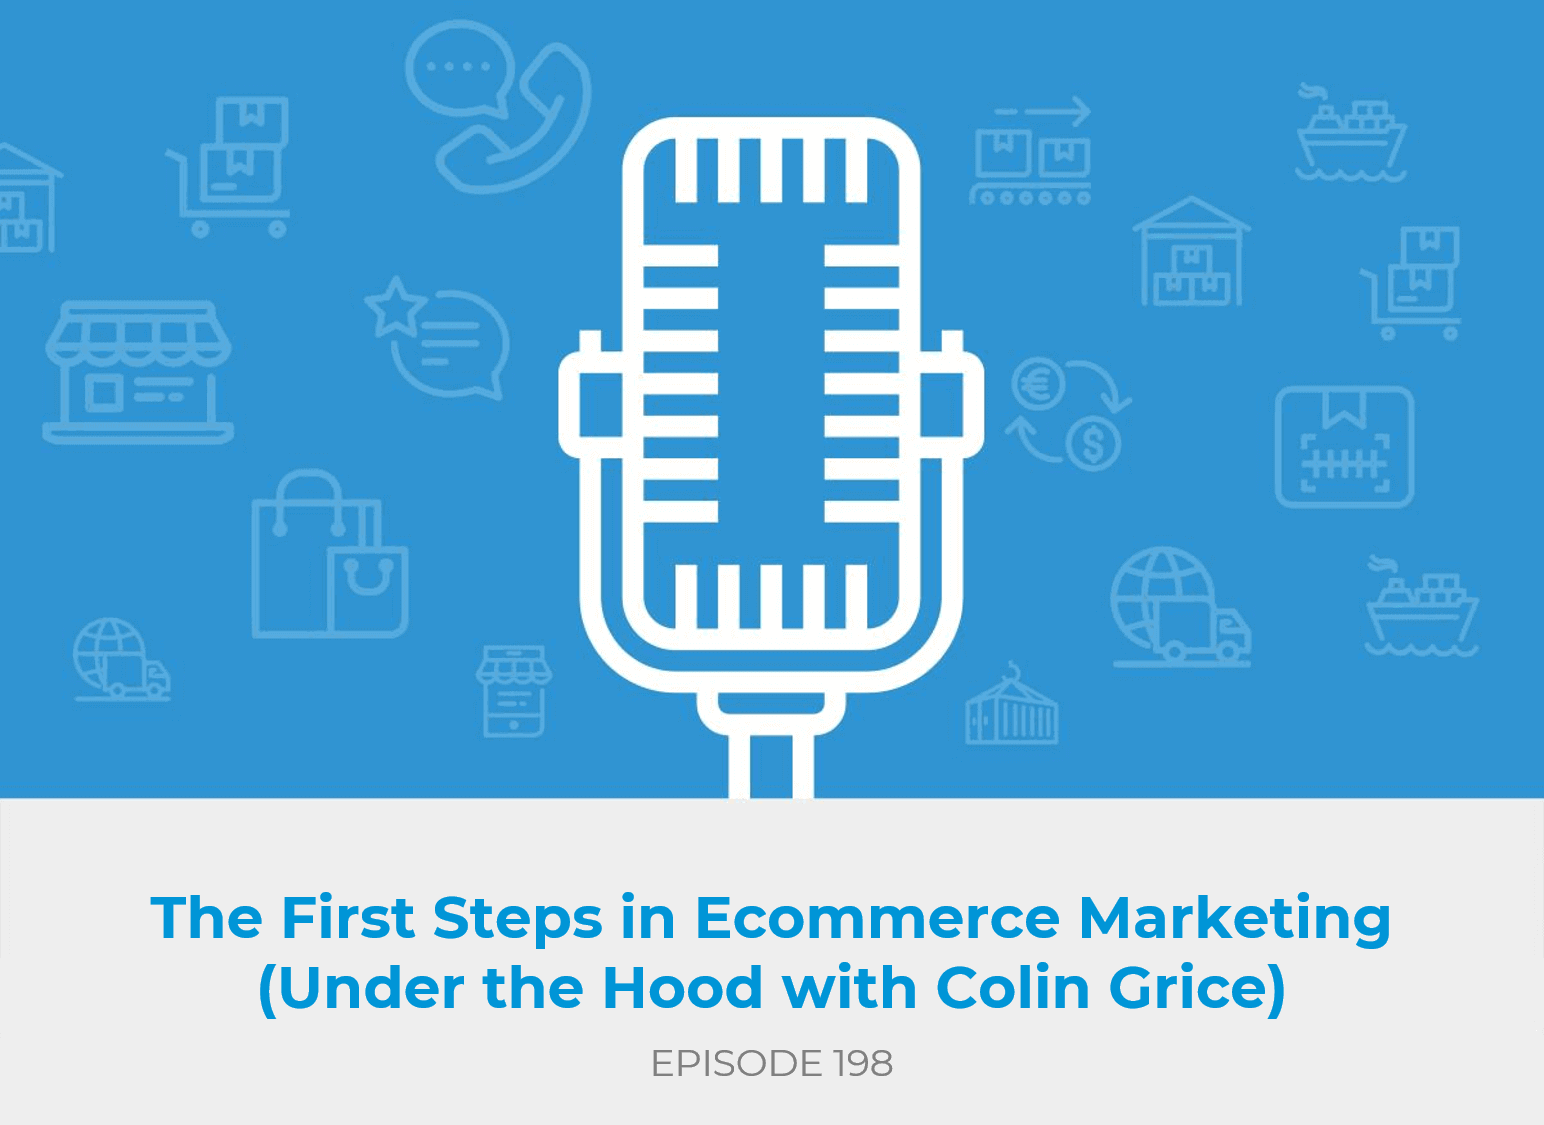 The First Steps in Ecommerce Marketing (Under the Hood with Colin Grice)